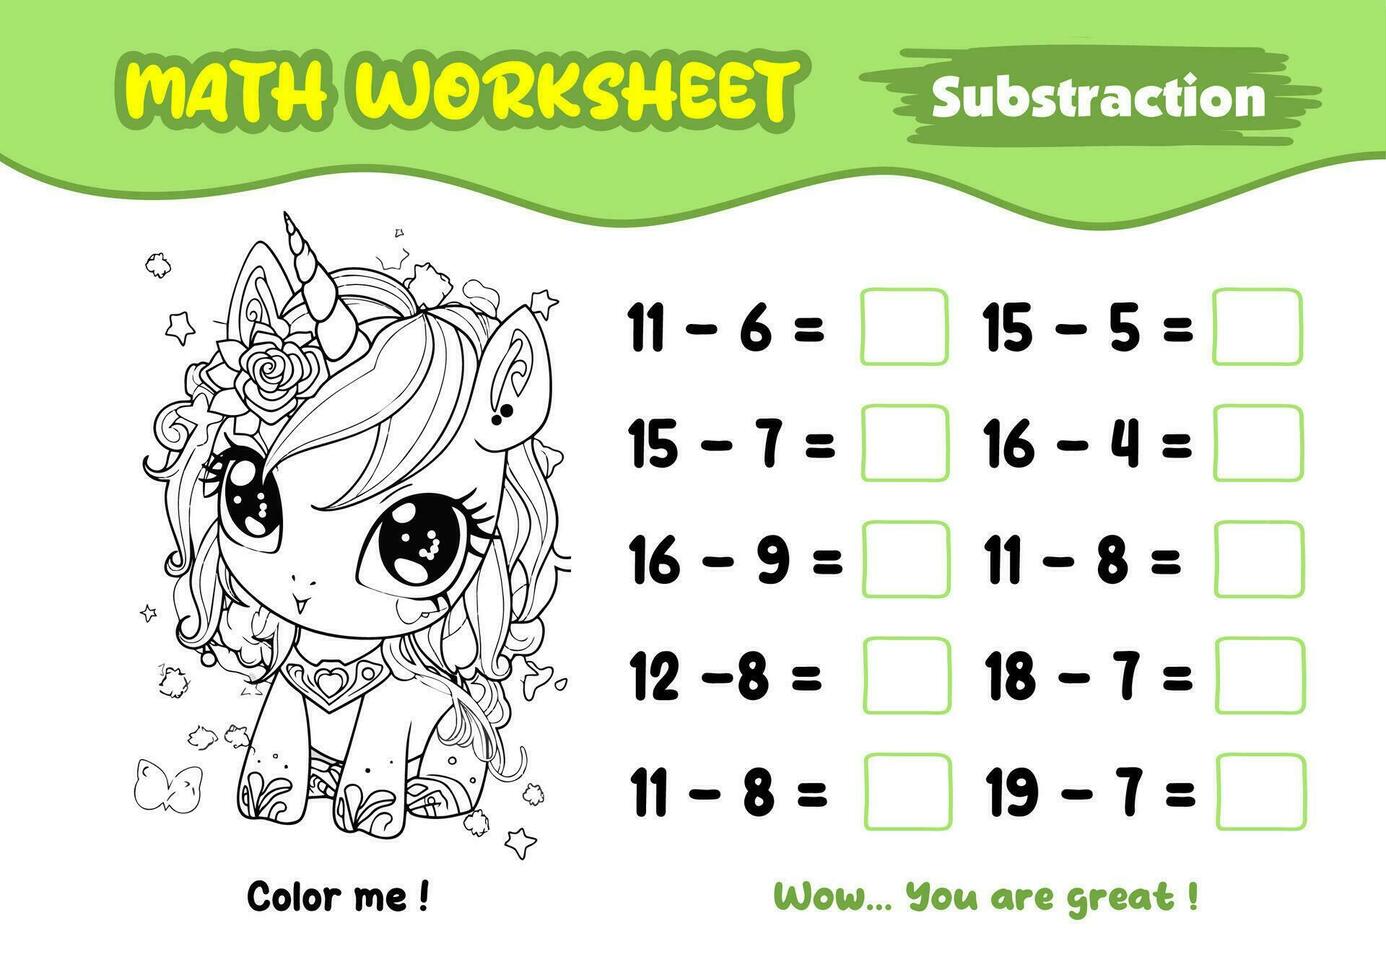 math worksheets for early childhood with interesting coloring pictures vector